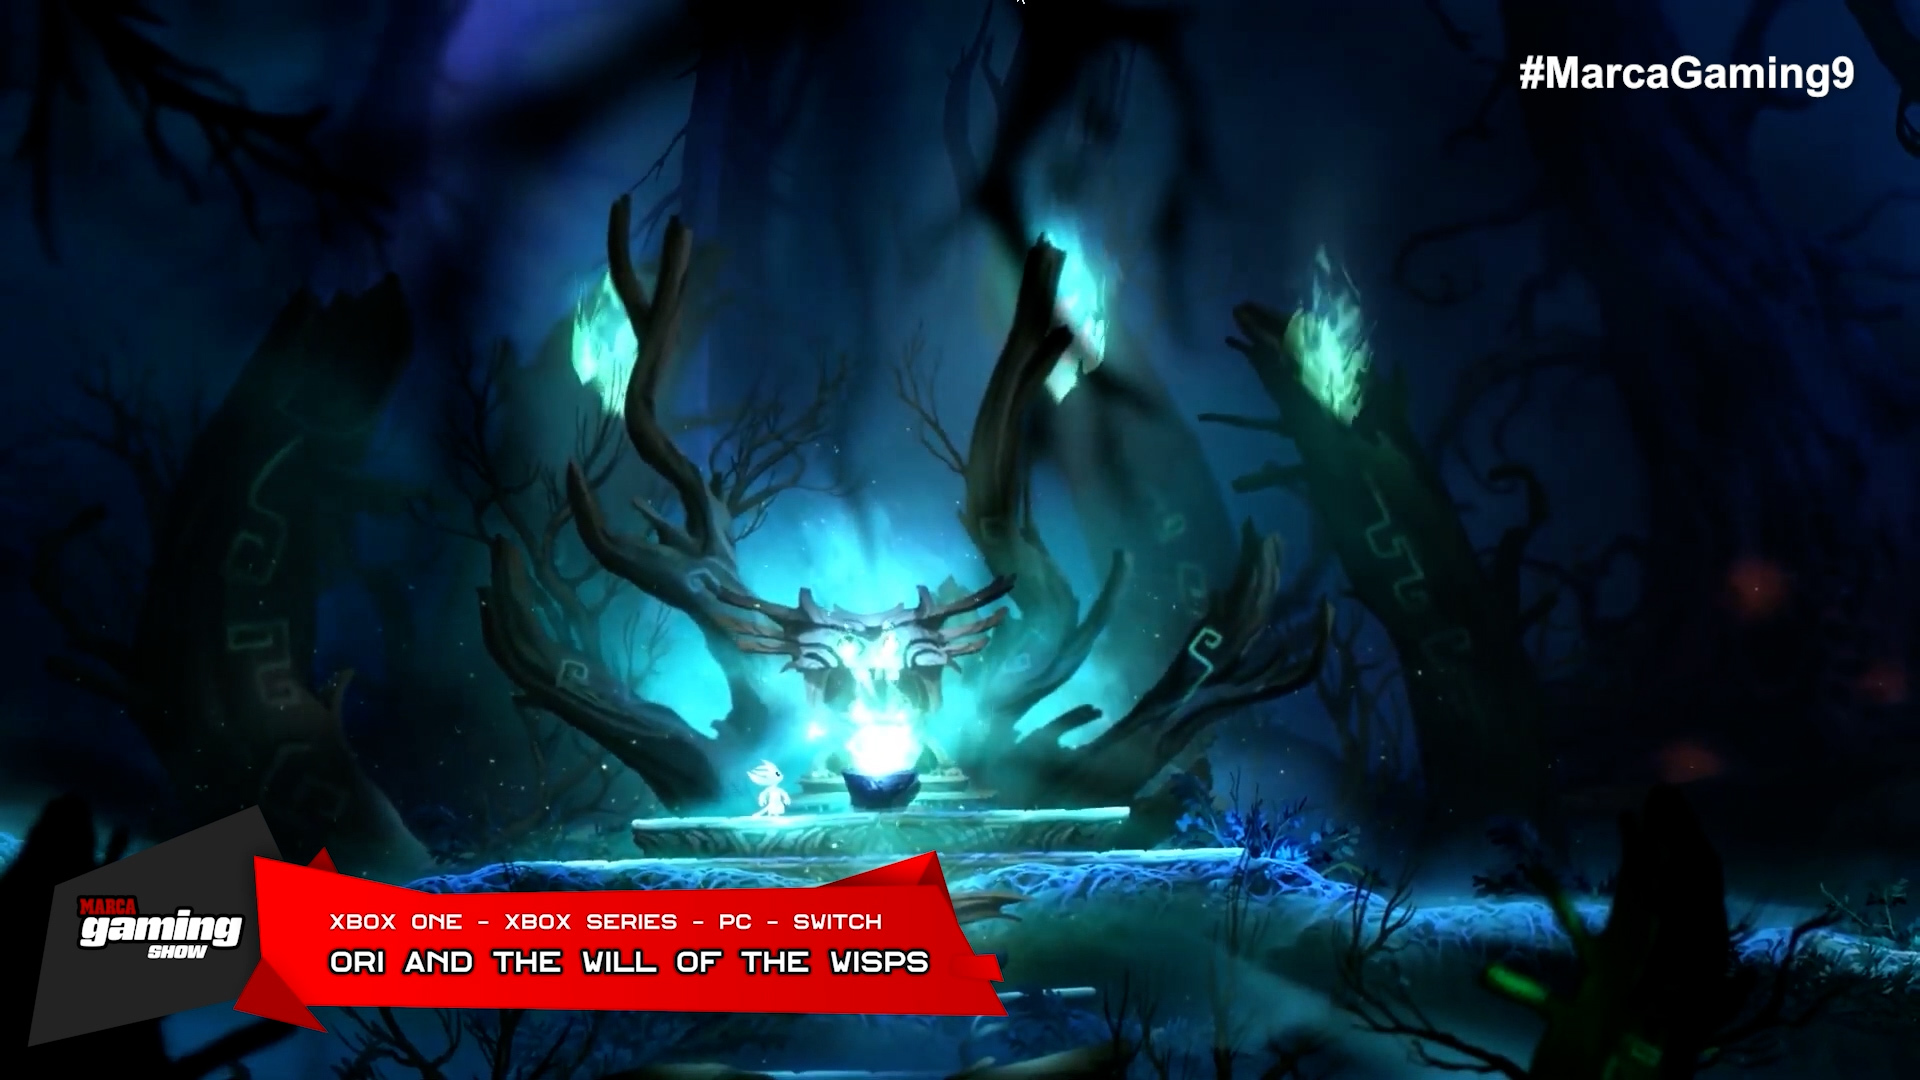 Ori and the will of the wisps ( SWITCH - XBOX ONE - XBOX SERIES - PC )